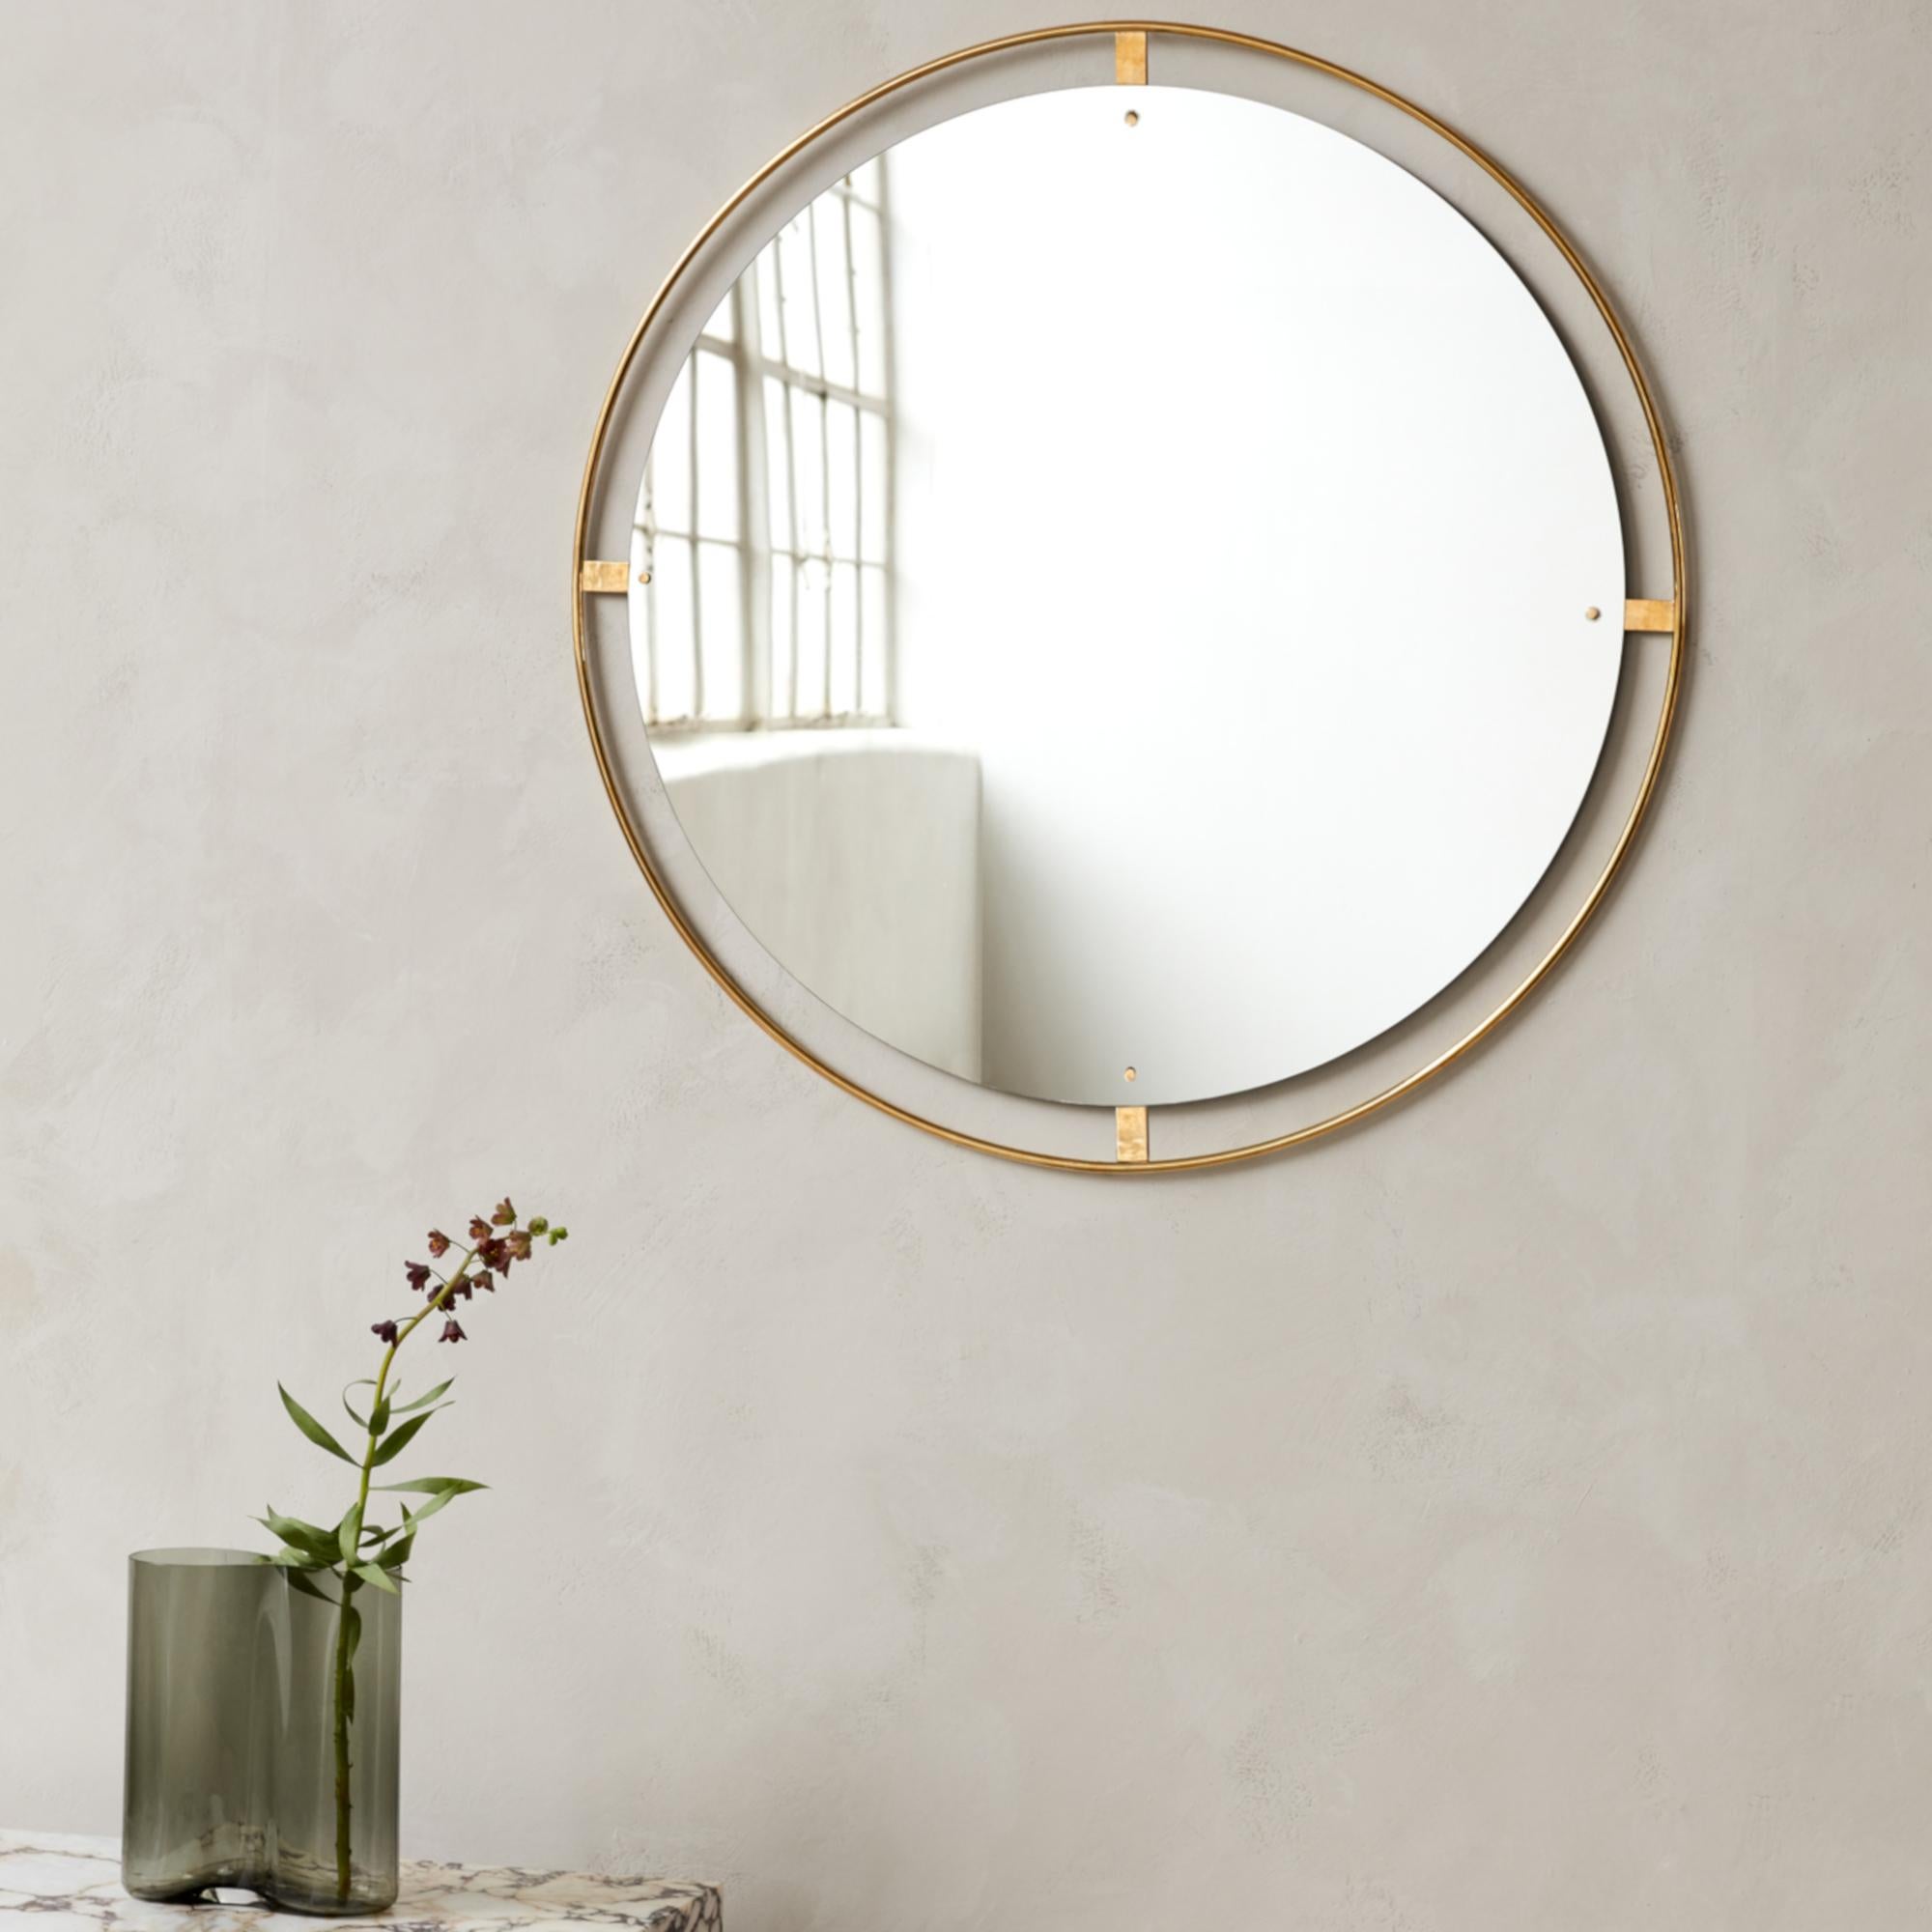 Nimbus Wall Mirror, Polished Brass In New Condition For Sale In San Marcos, CA